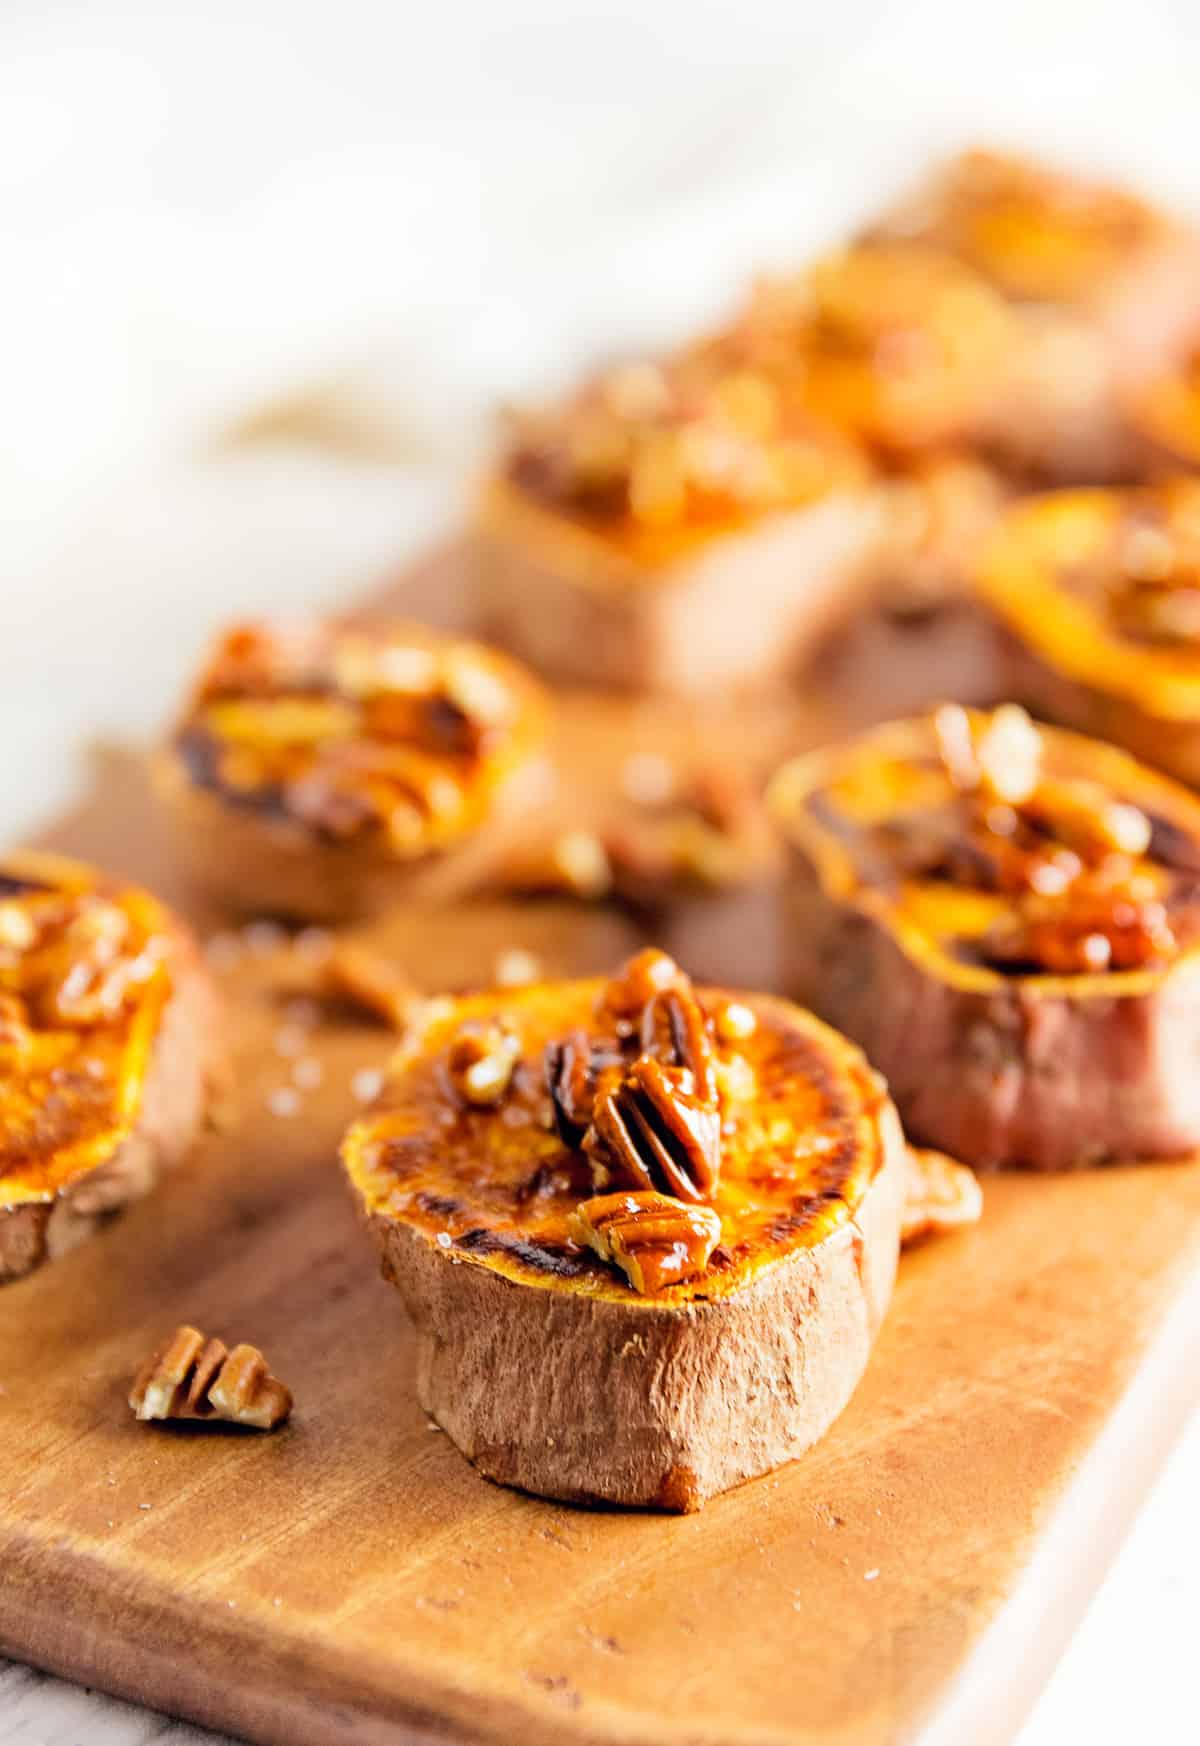 glazed pecan sweet potato rounds, sweet potatoes, recipe, vegan, vegetarian, whole food plant based, wfpb, gluten free, oil free, refined sugar free, no oil, no refined sugar, no dairy, dinner, lunch, side, appetizer, dinner party, entertaining, simple, healthy